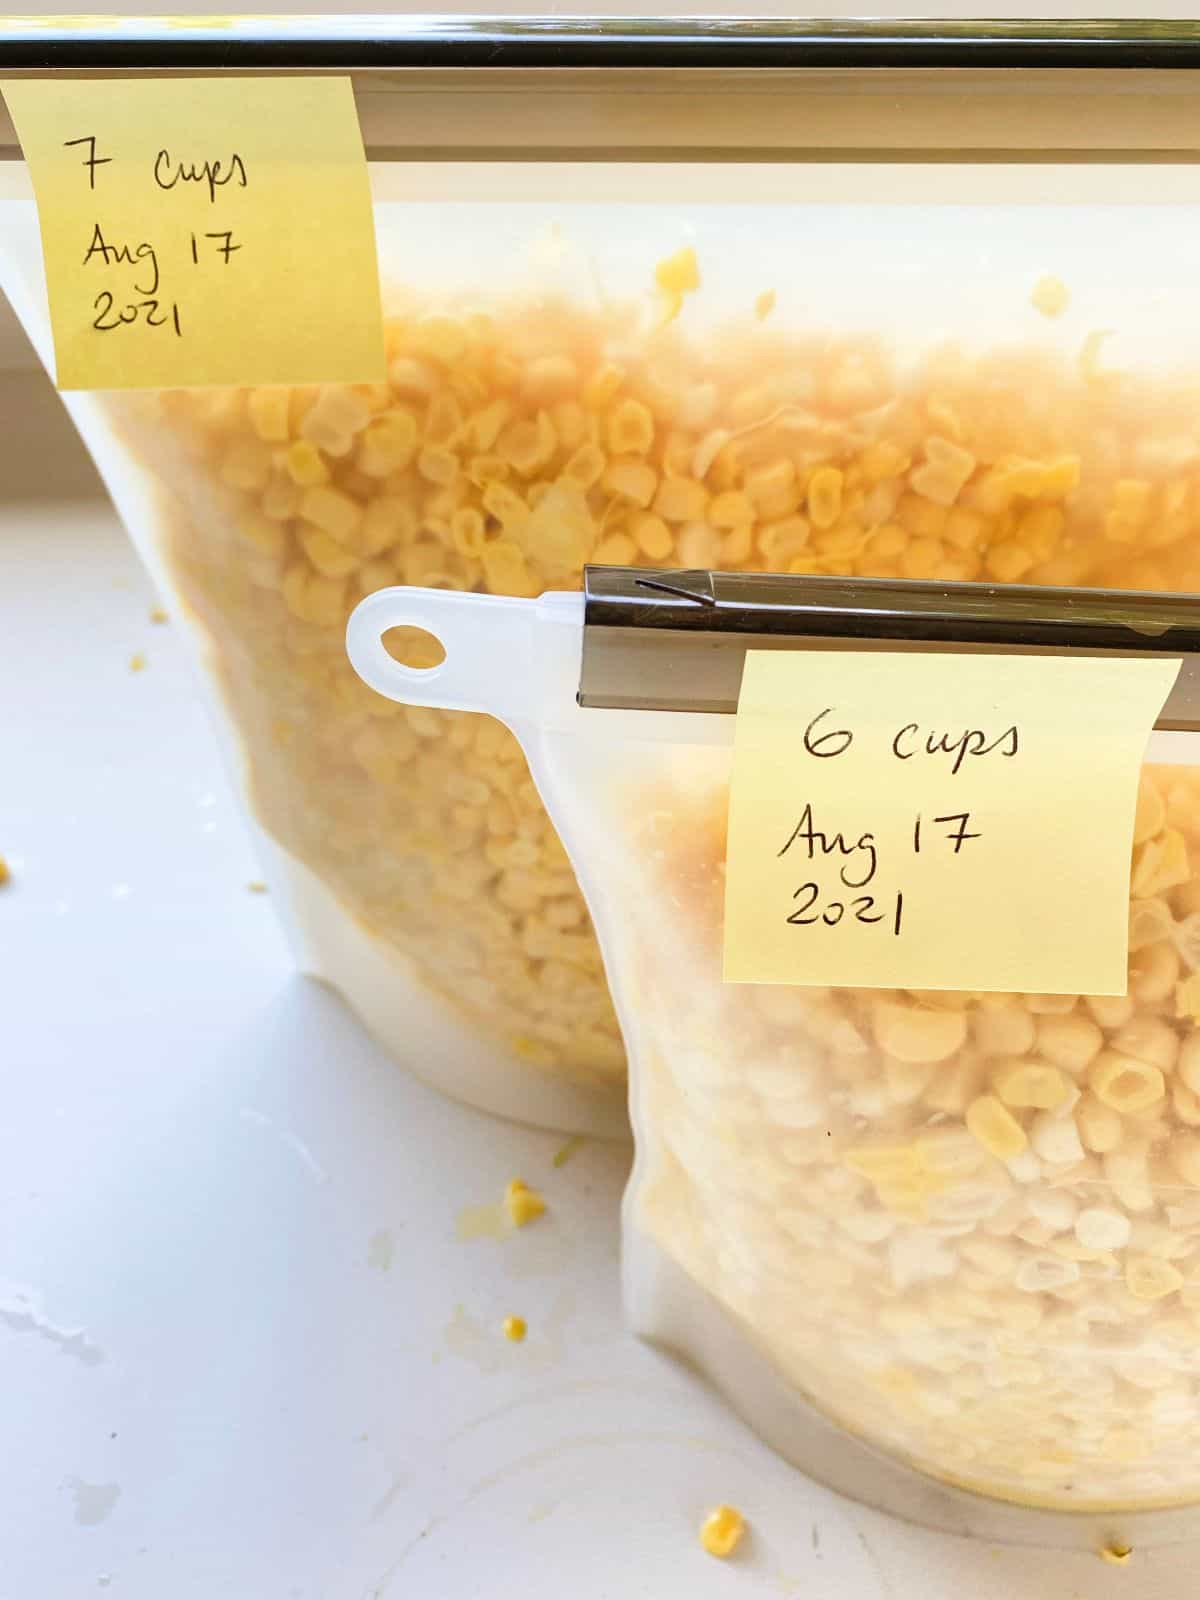 An image of silicone pouches filled with corn kernels and labeled with a date.